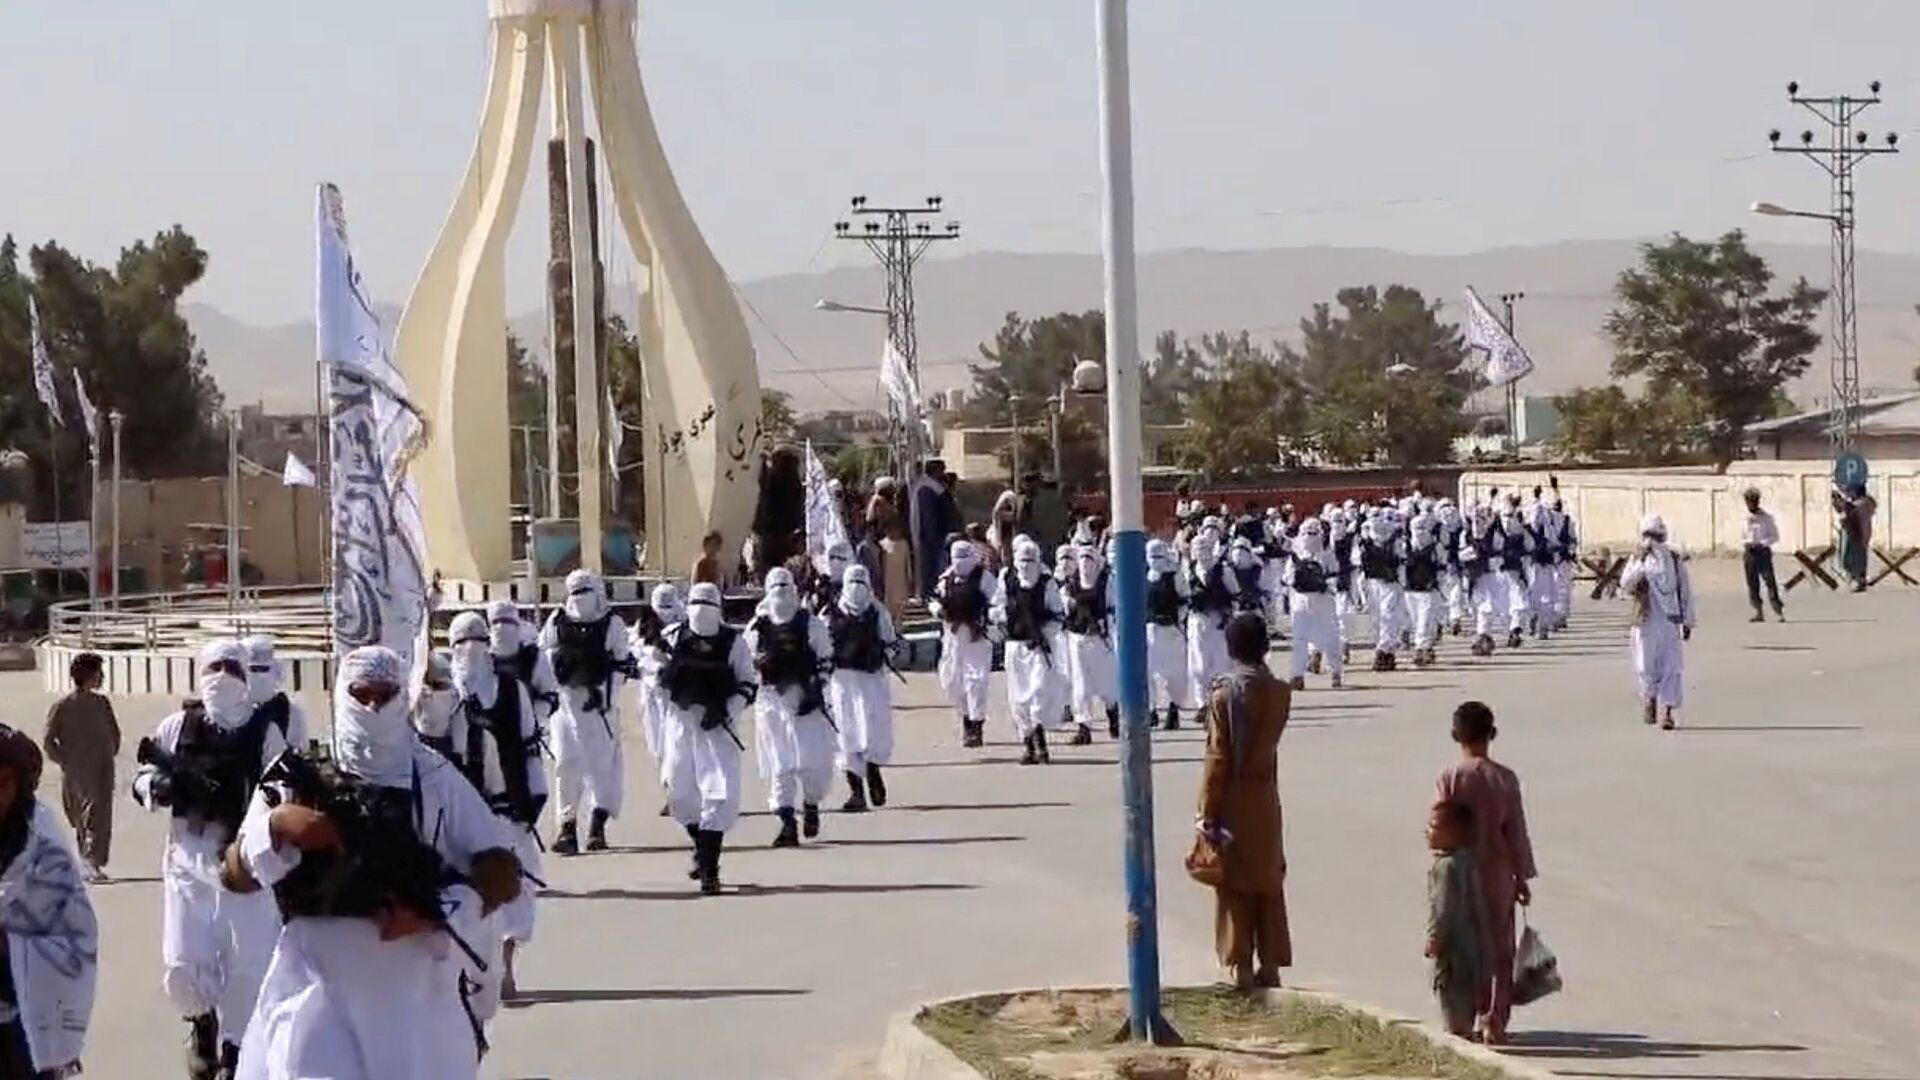 Taliban fighters march in uniforms on the street in Qalat, Zabul Province, Afghanistan, in this still image taken from social media video uploaded August 19, 2021 and obtained by REUTERS - Sputnik International, 1920, 01.09.2021